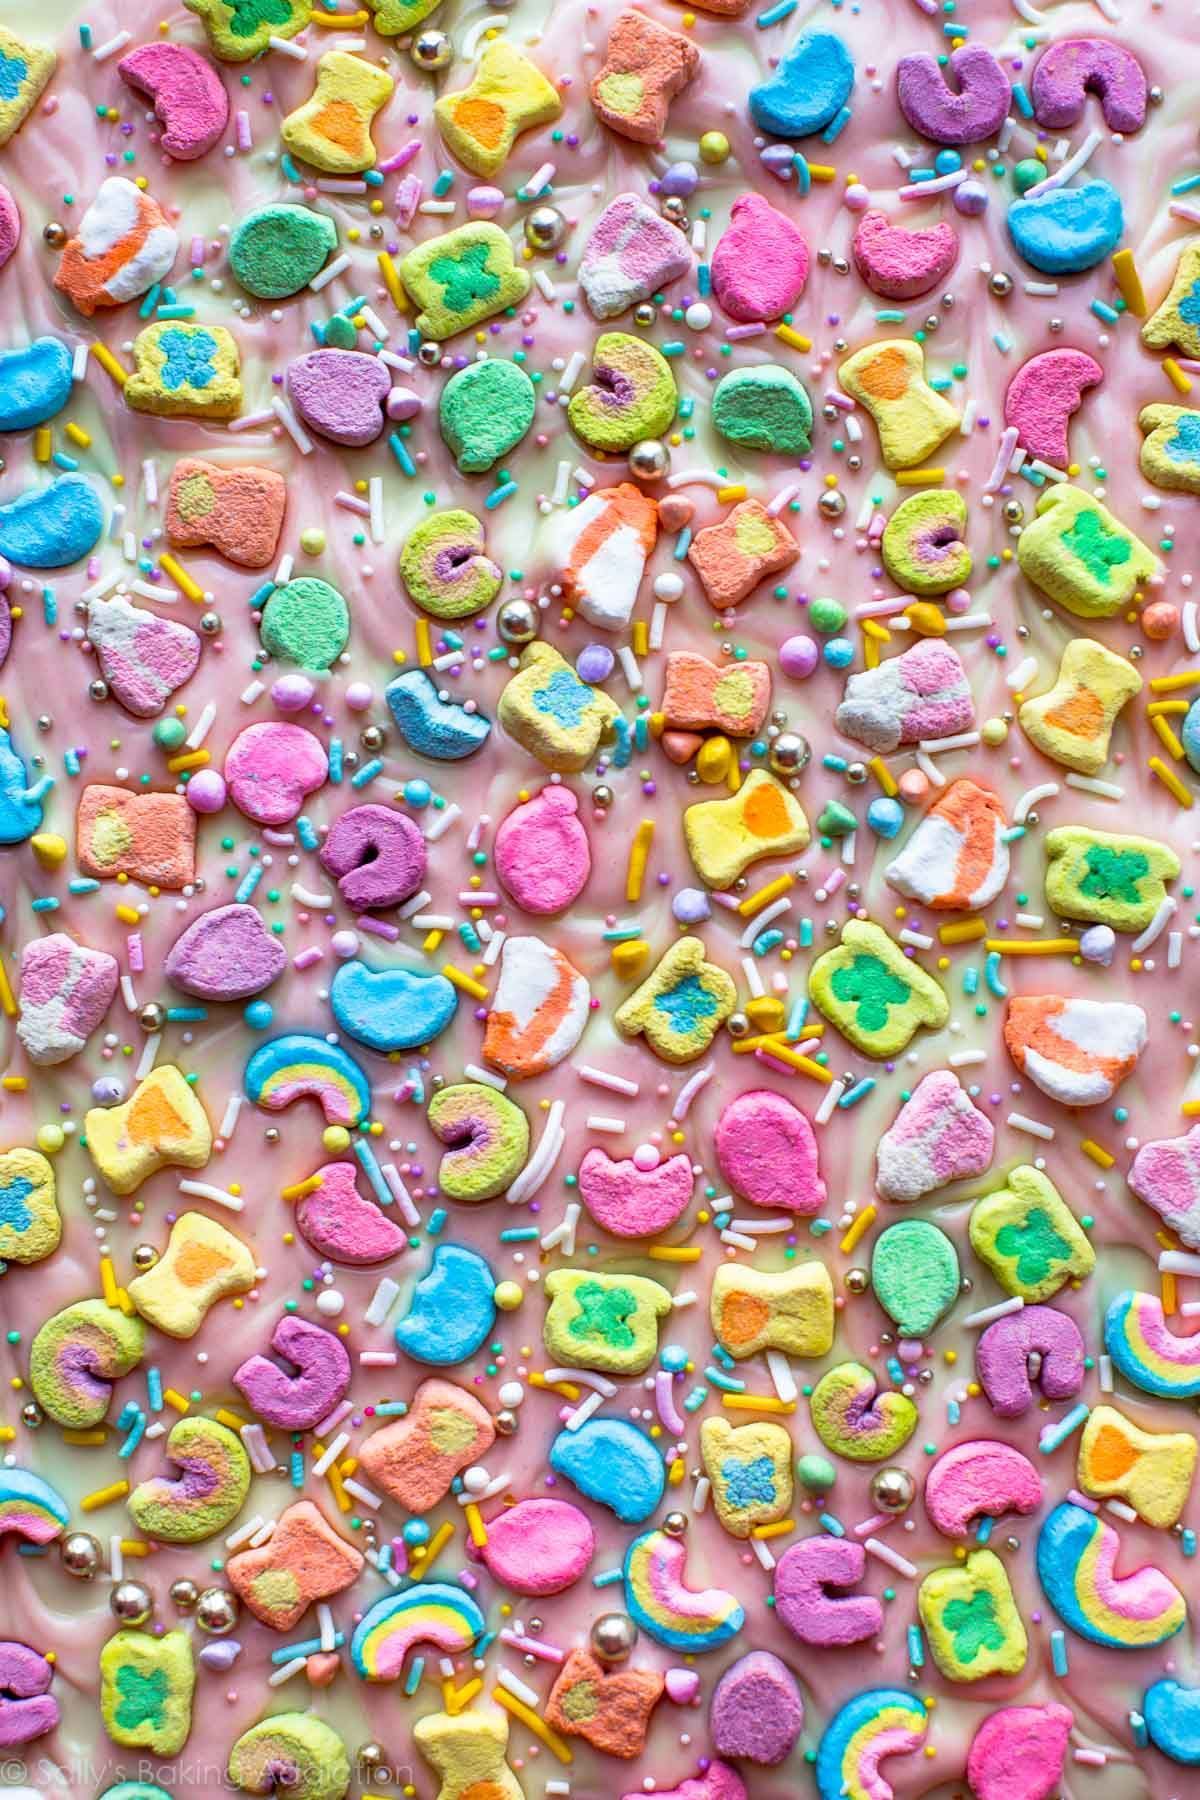 Magical lucky charms bark with only 3 ingredients! White chocolate